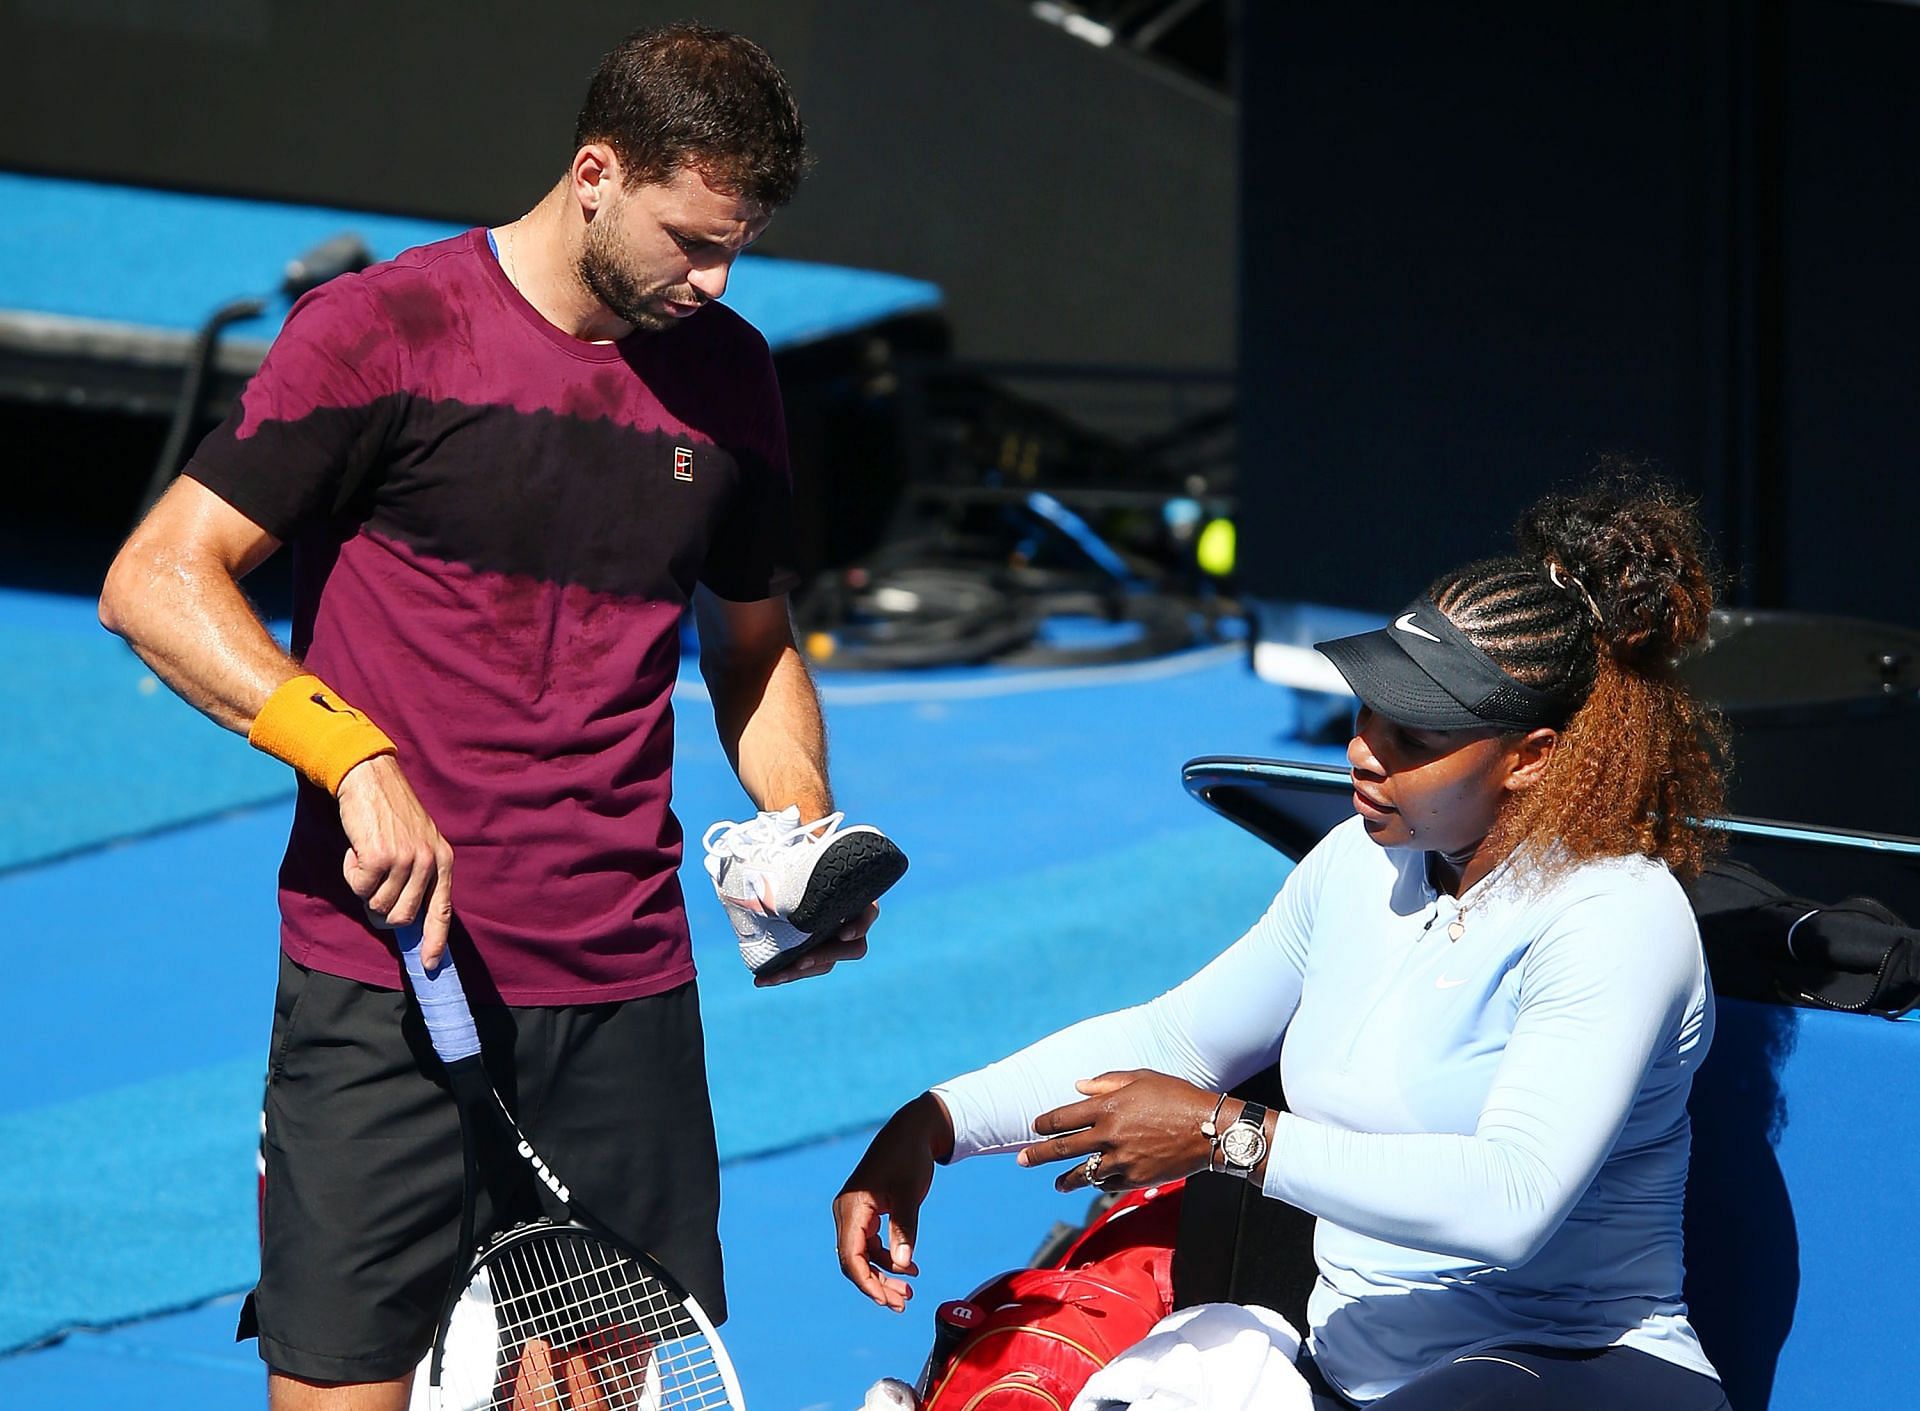 Not a single chance" - Grigor Dimitrov, Coco Gauff, Jannik Sinner & others  trash Drake's claim of beating Serena Williams if she played left-handed